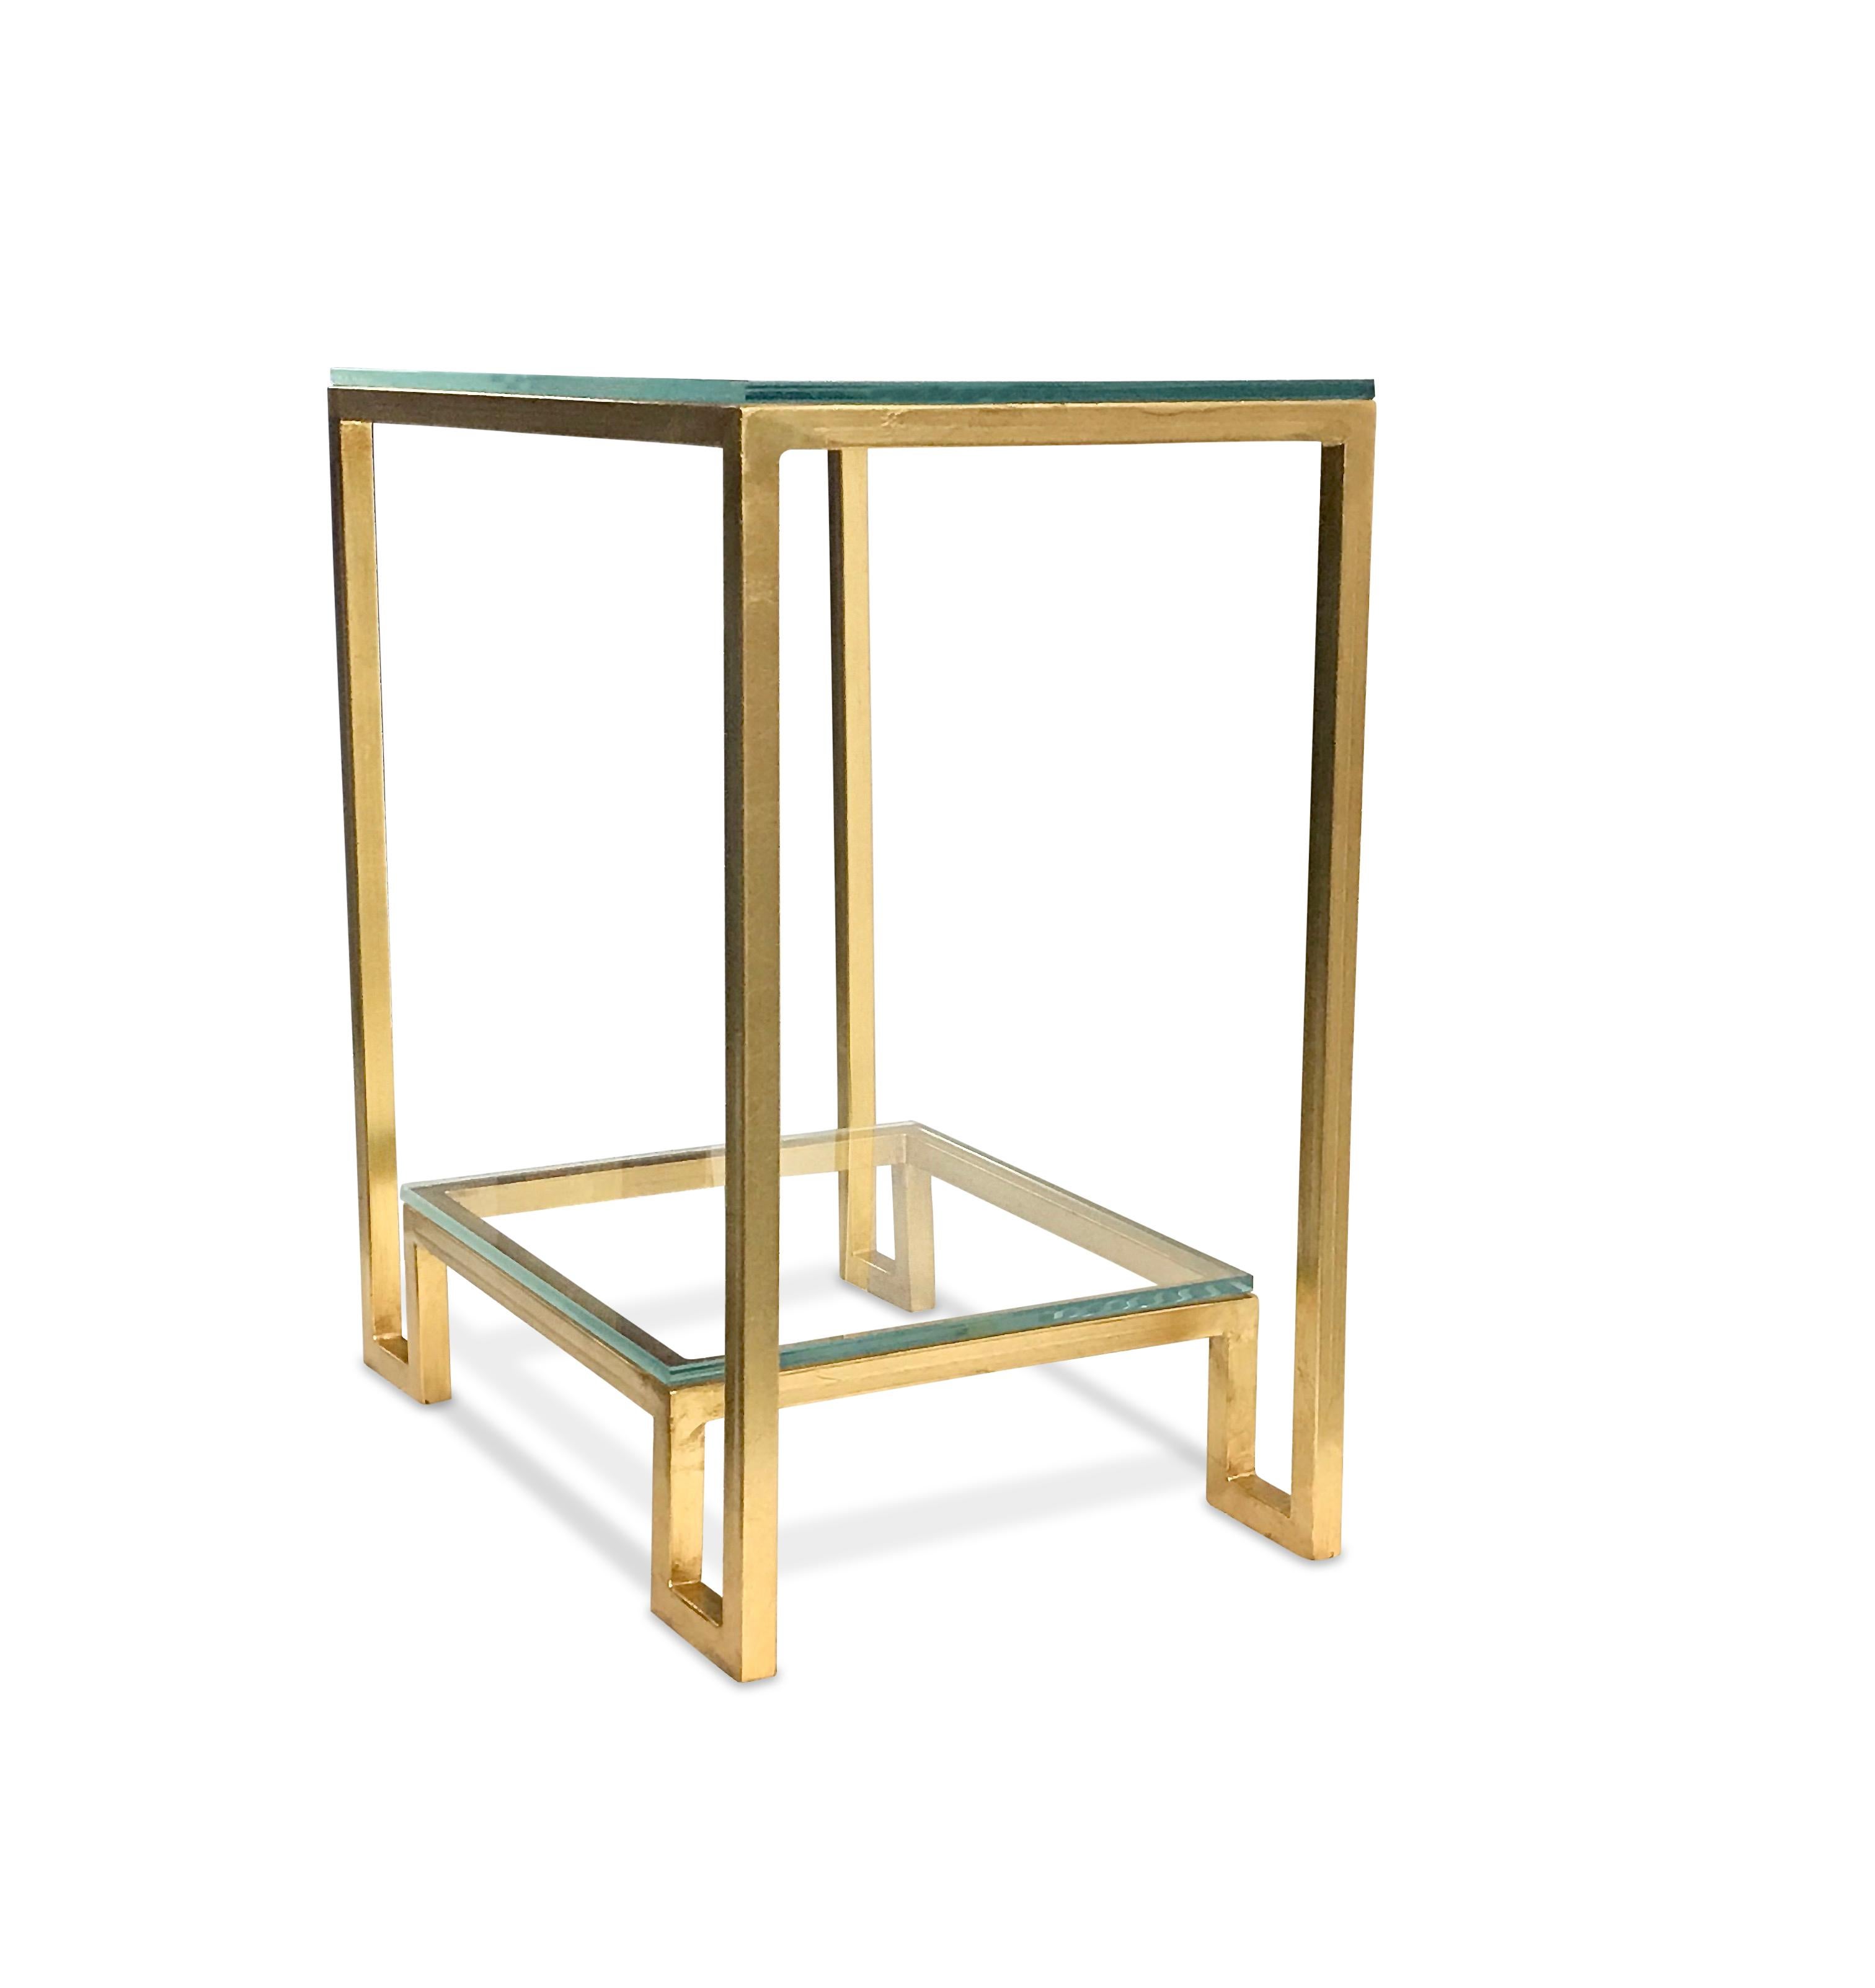 Contemporary iron based side table, gilded with gold leaves with two shelves each topped with a brand new thick glass. The glass edges are polished.

 